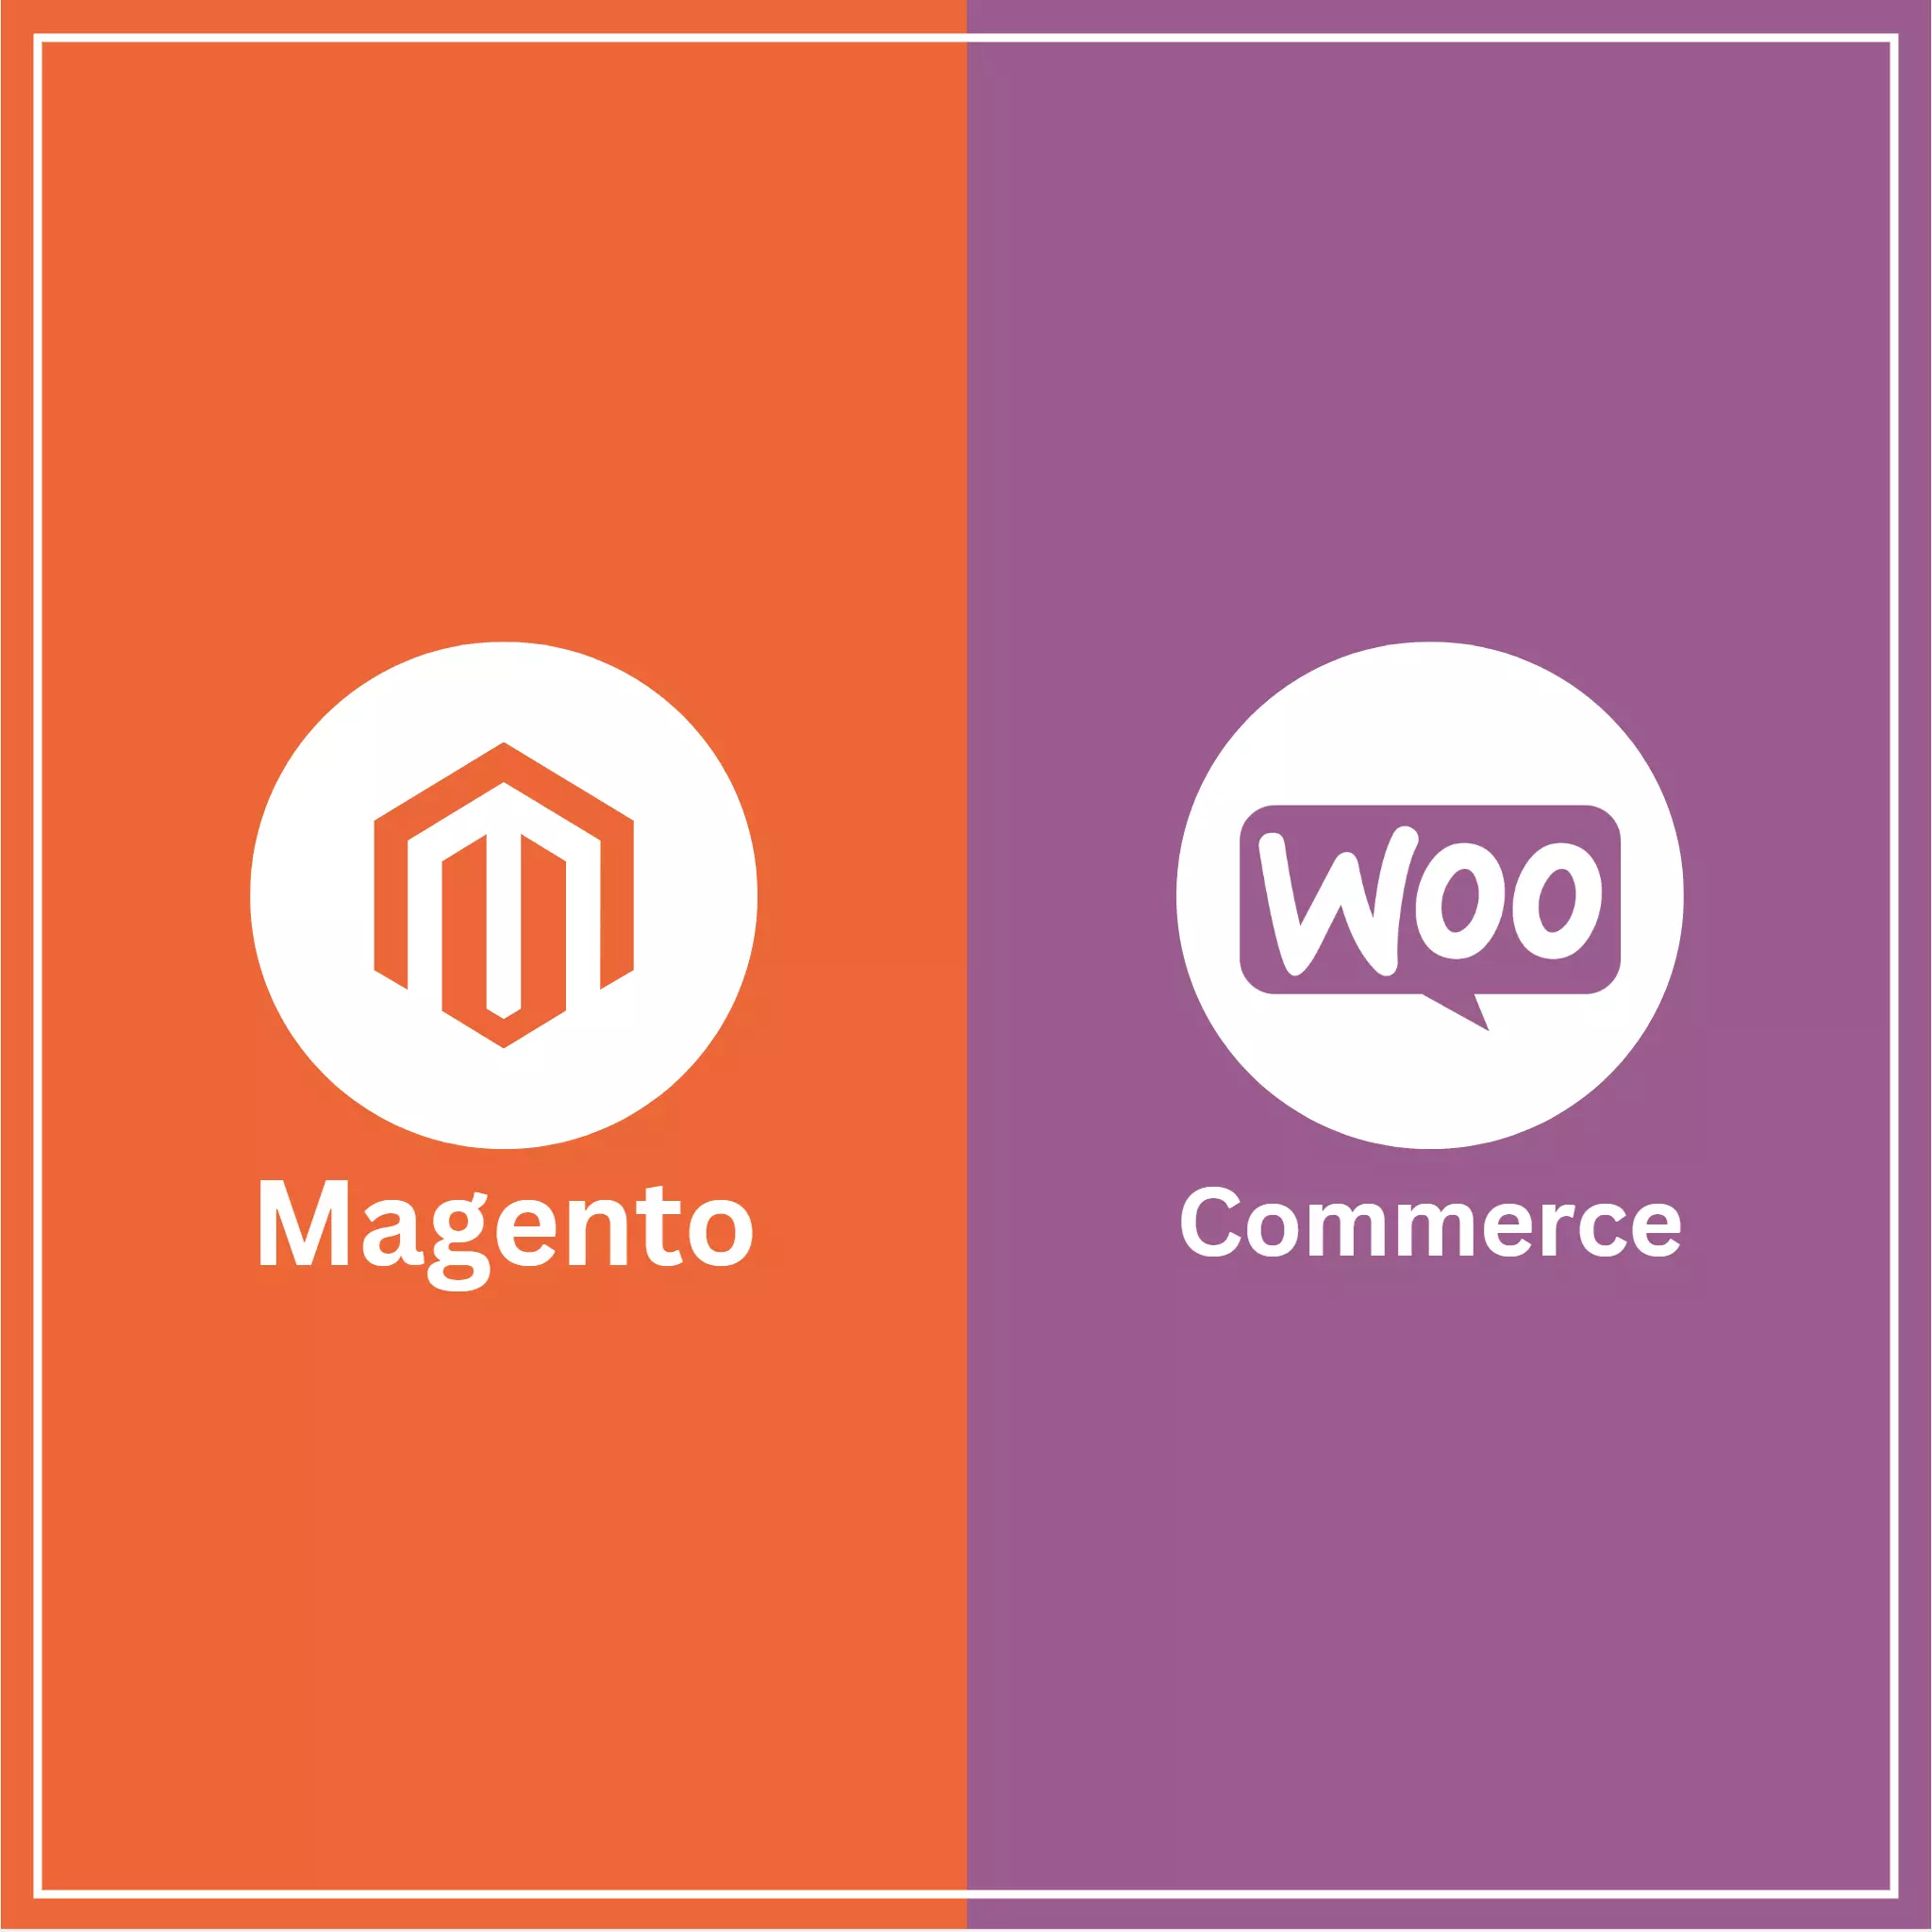 Comparison of Magento vs WooCommerce - Which eCommerce platform is right for you?